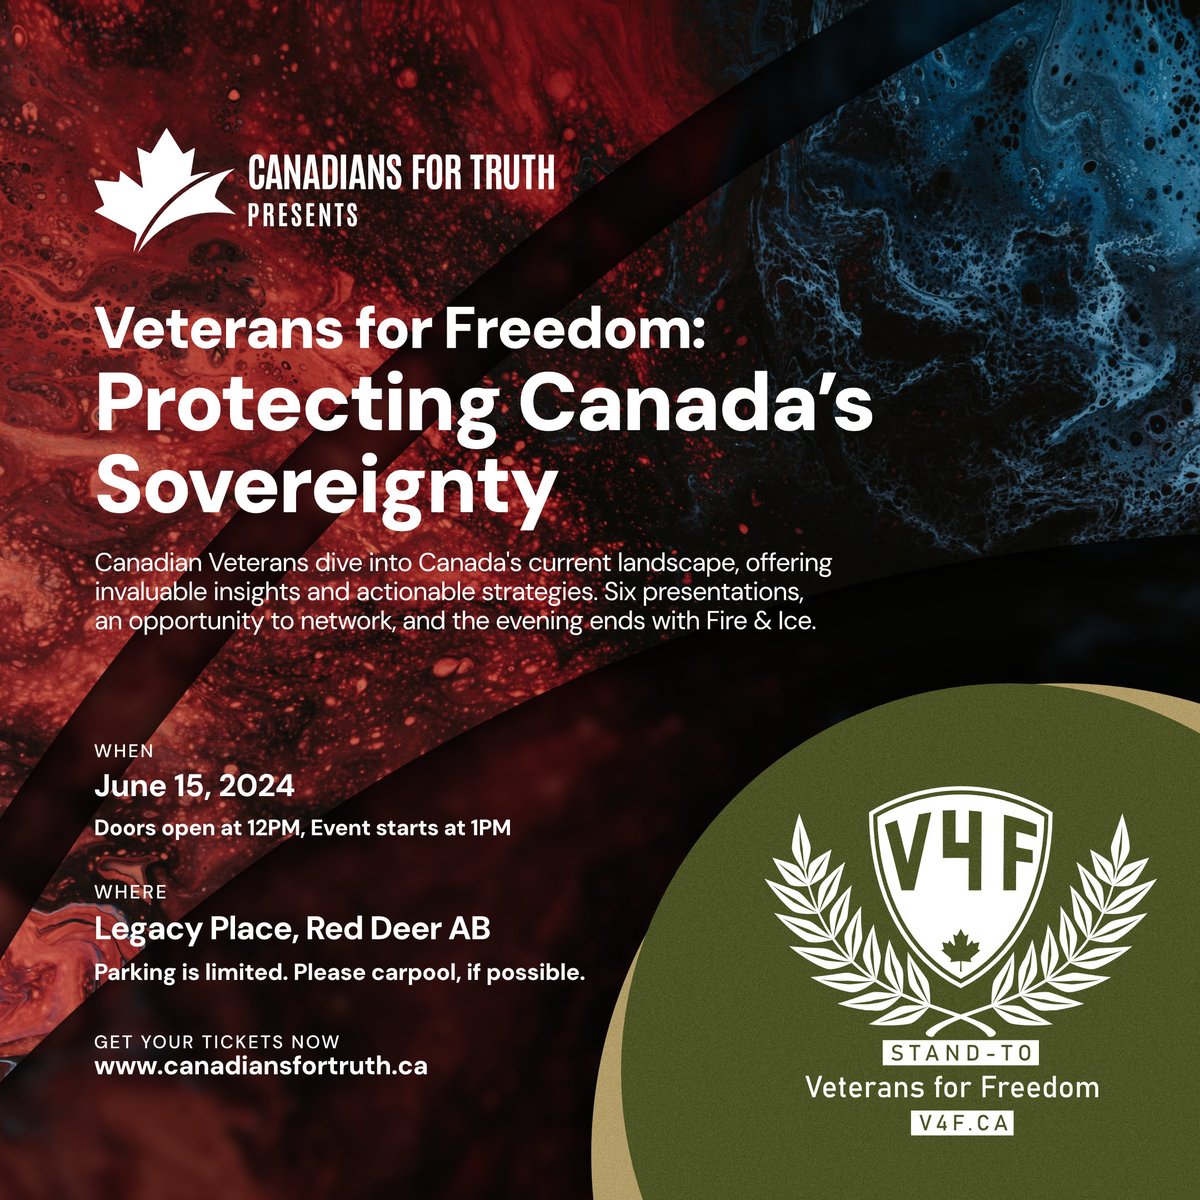 Join Canadians for Truth (@Canadians4Truth ) & Veterans for Freedom (@Vets4FreeCanada ) at their June 15th event and hear Canadian Veterans dive into Canada's current landscape, offering invaluable insights and actionable strategies. There will be Six presentations, an